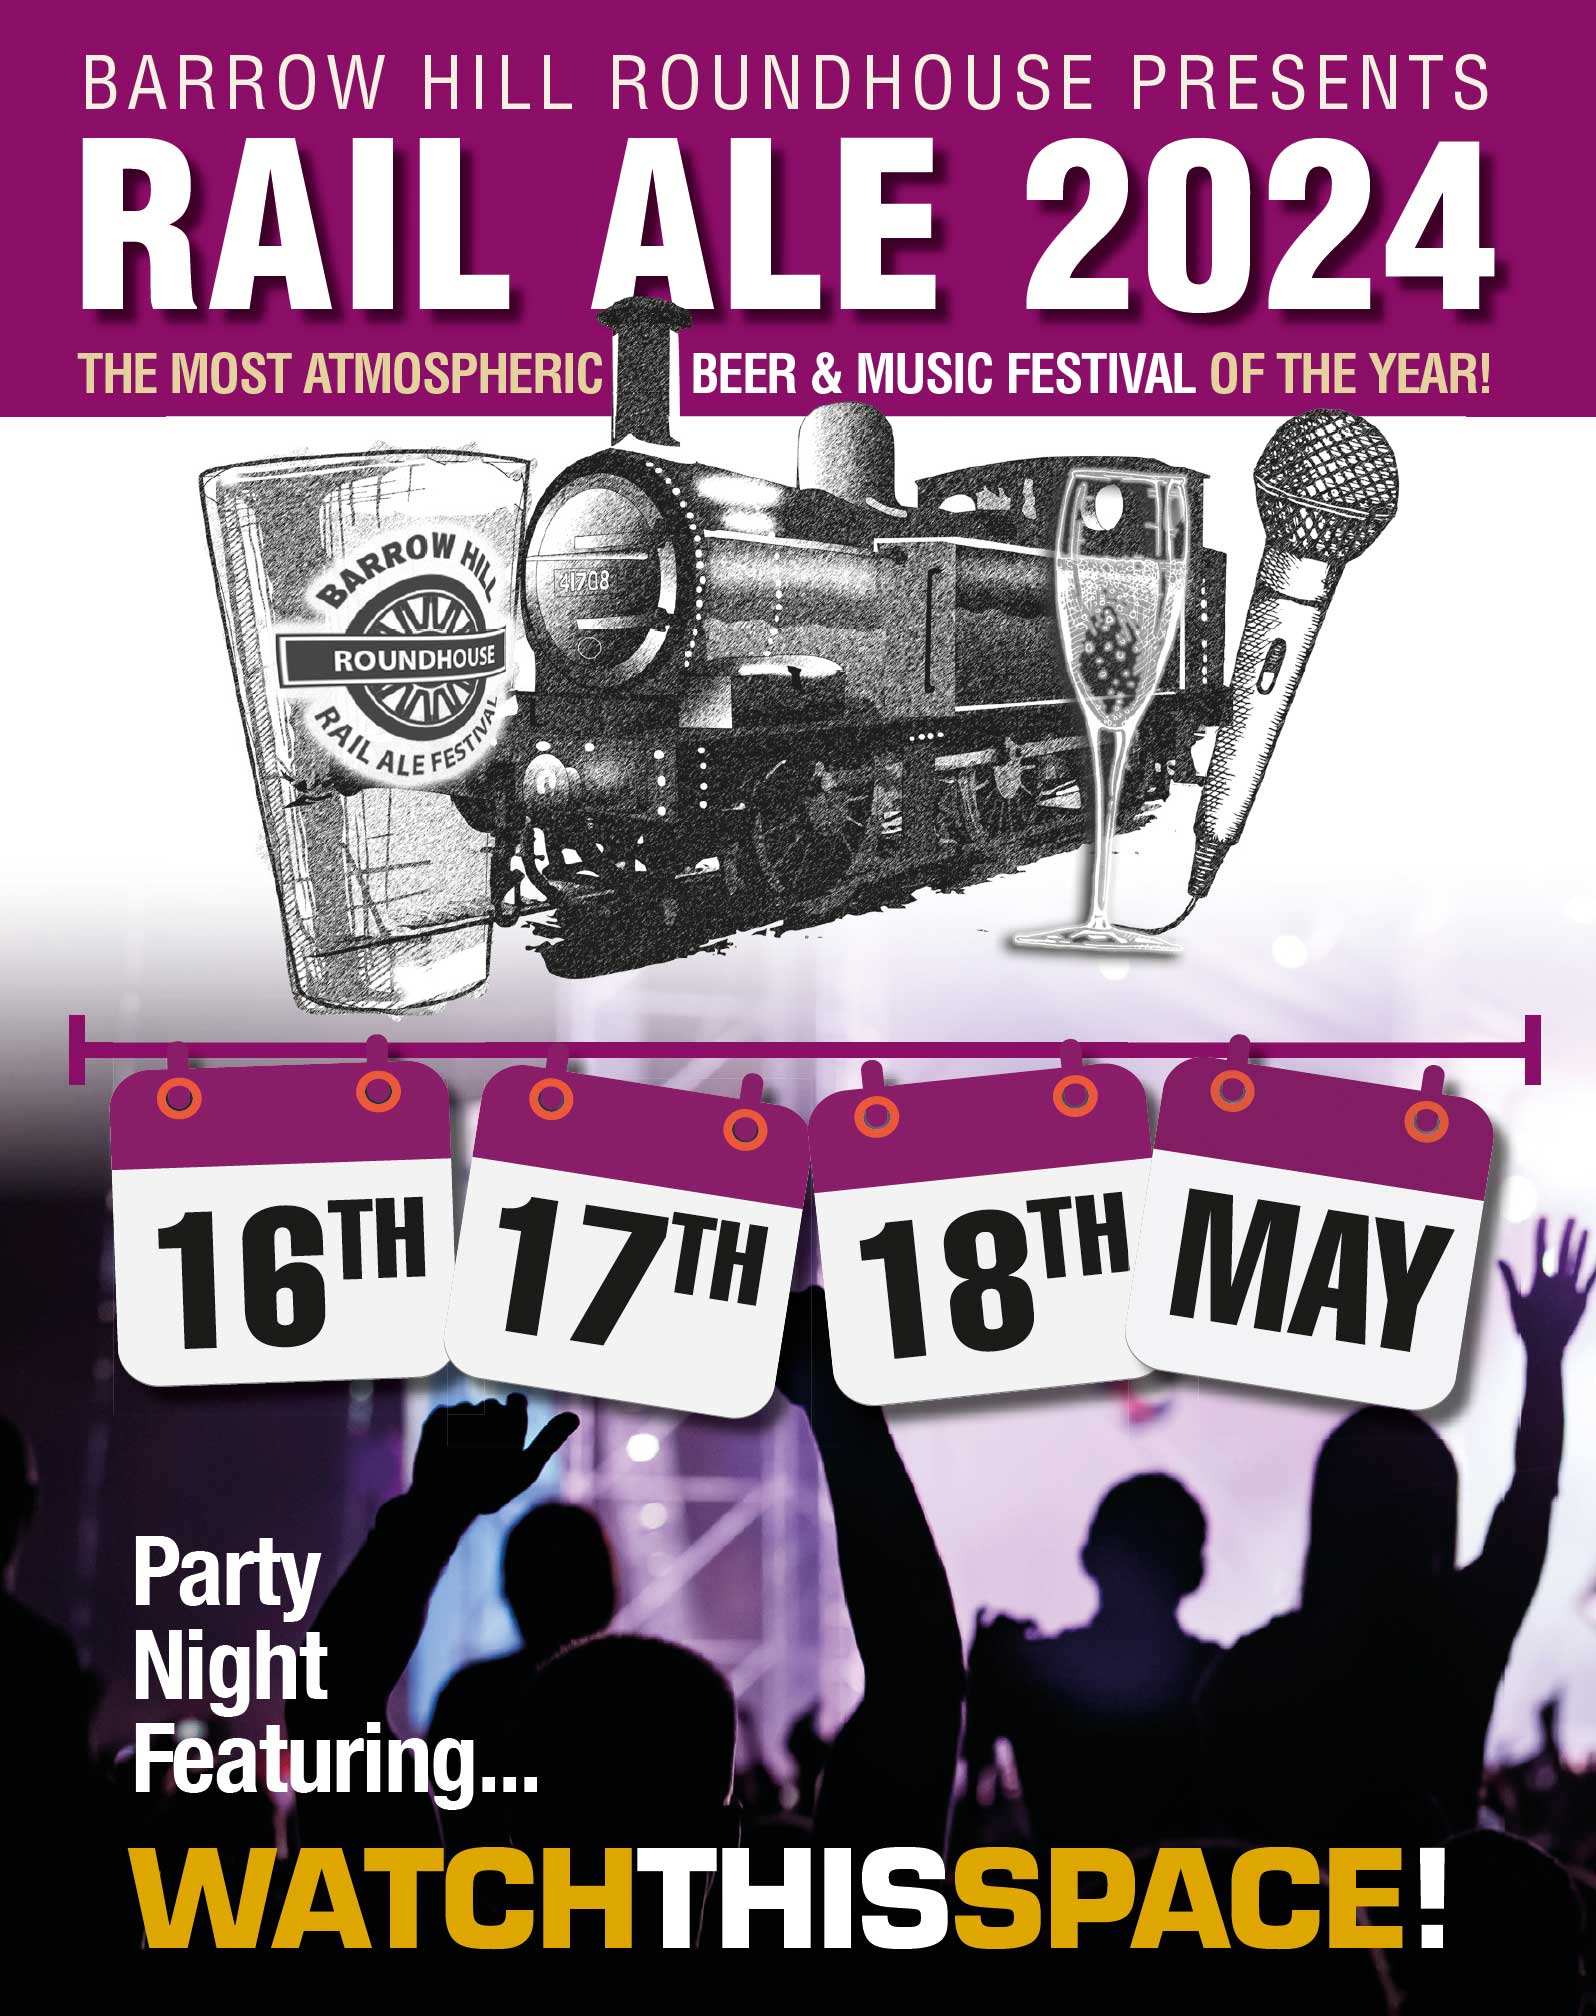 Rail ale party night 